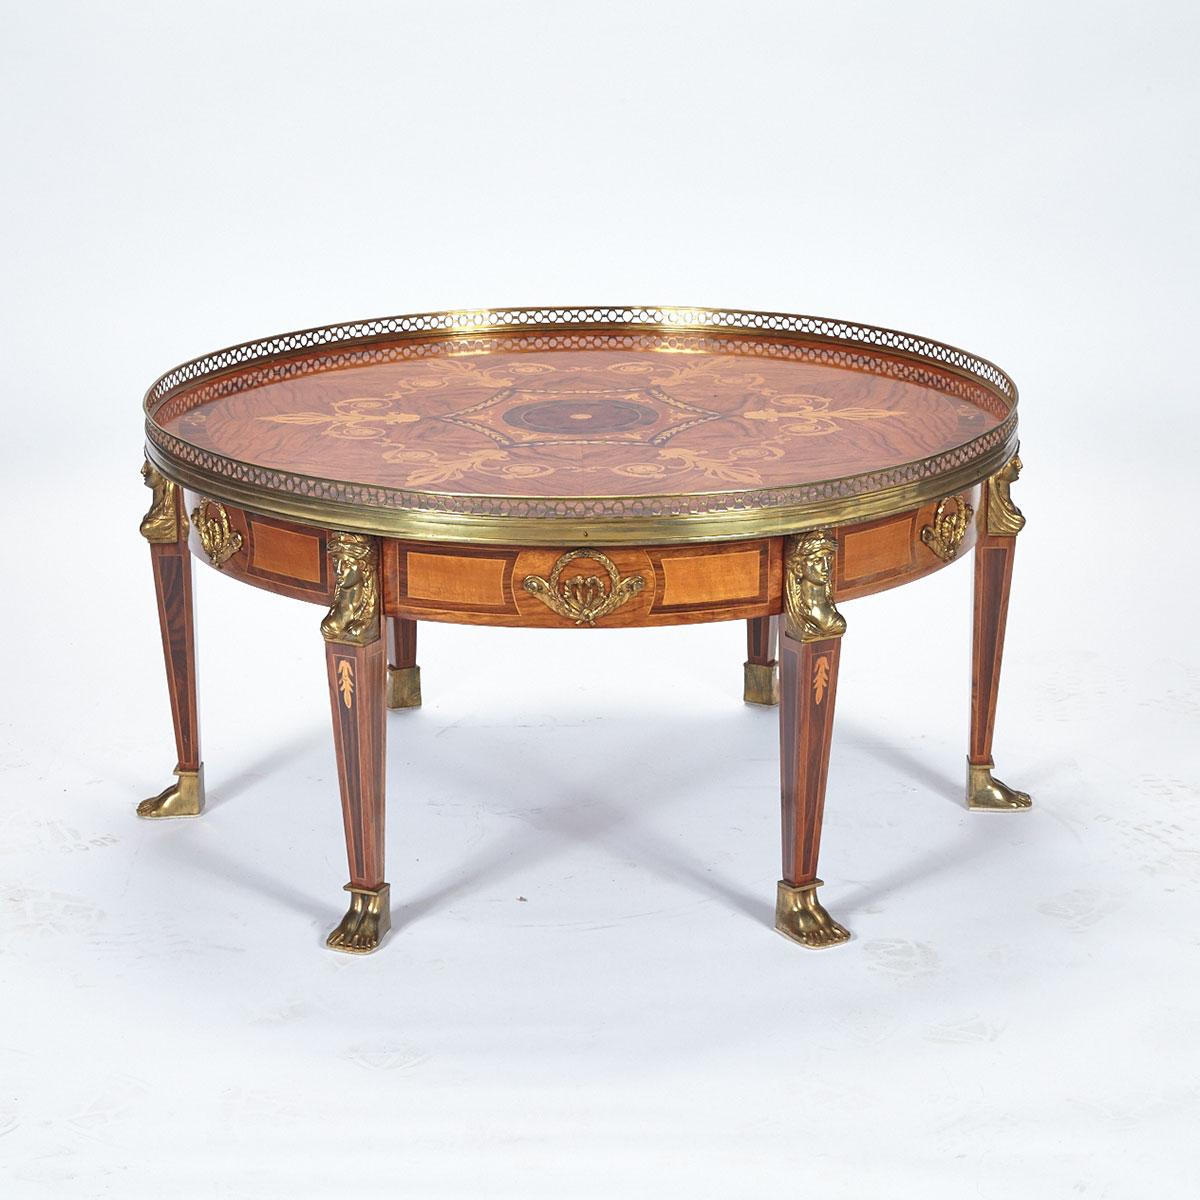 Empire Revival Ormolu Mounted Mixed Wood Marquetry Inlaid Low Table, mid 20th century